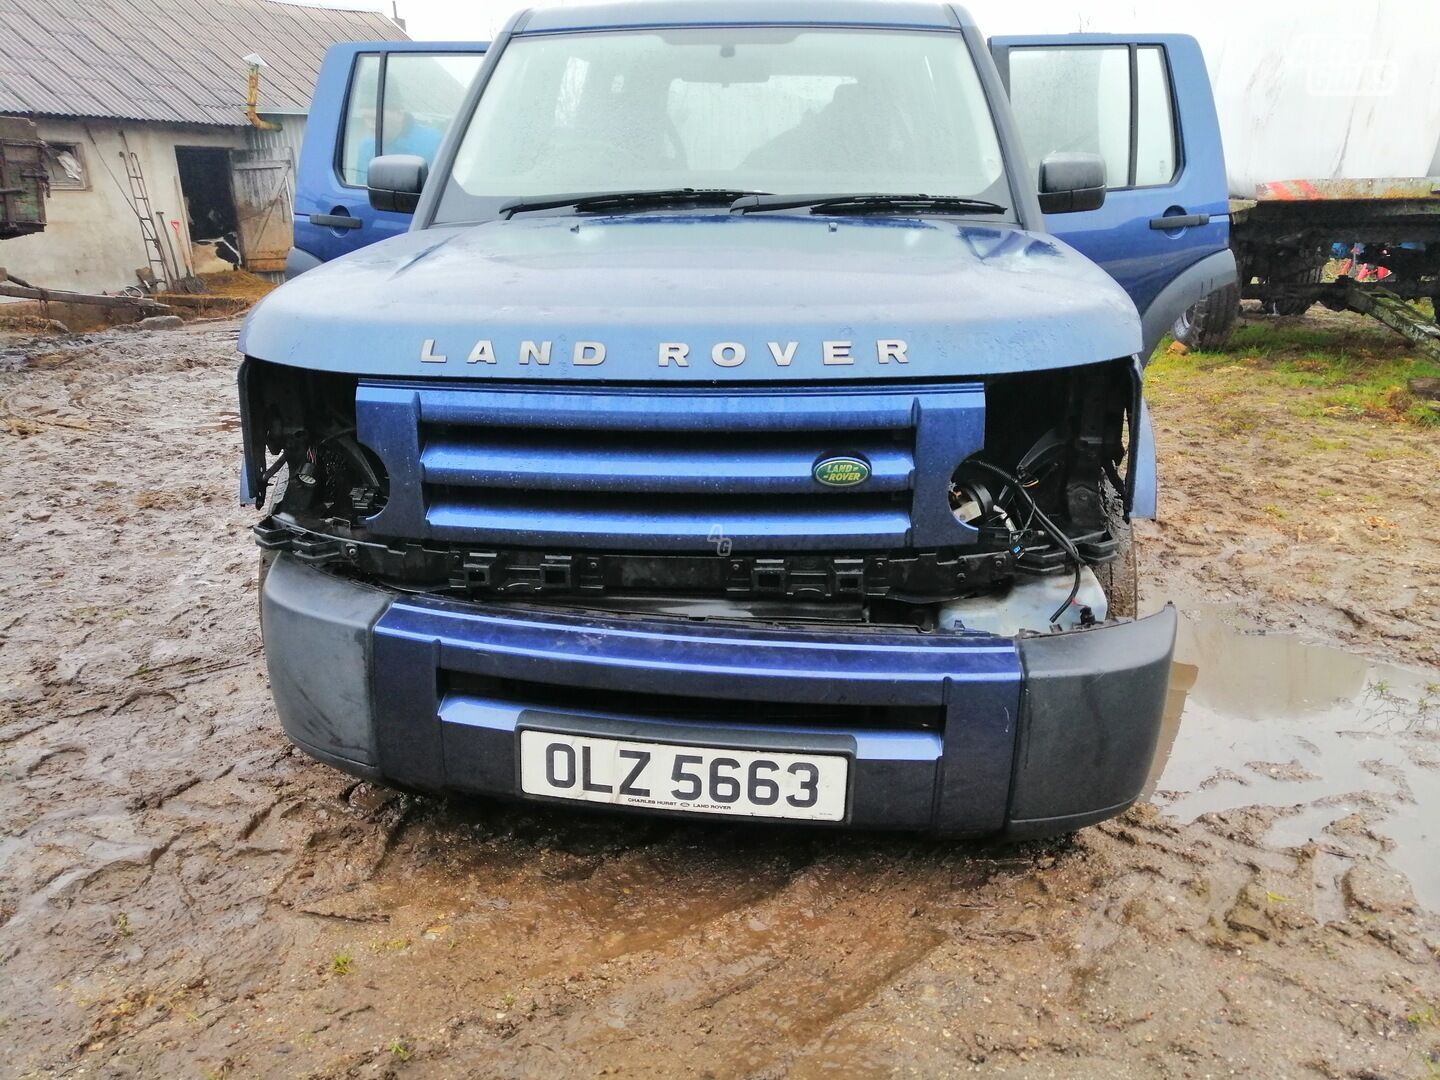 Land Rover Discovery 2005 г запчясти